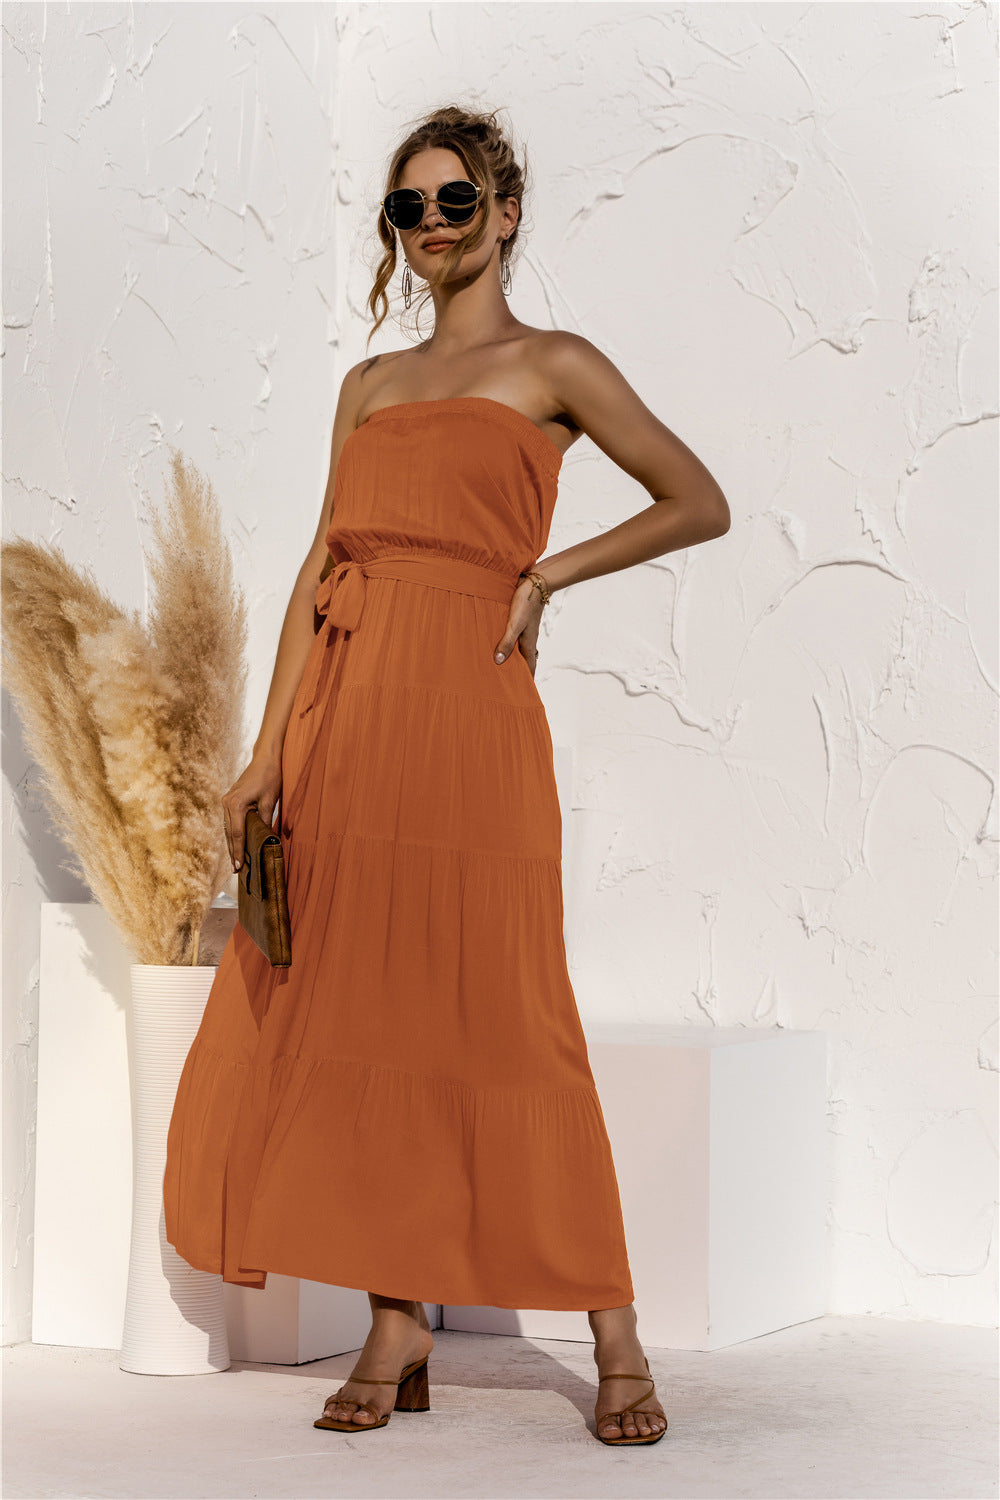 Don’t Mind Me Strapless Maxi Dress - orange strapless maxi dress with top overlay and tie waist. #Firefly Lane Boutique1